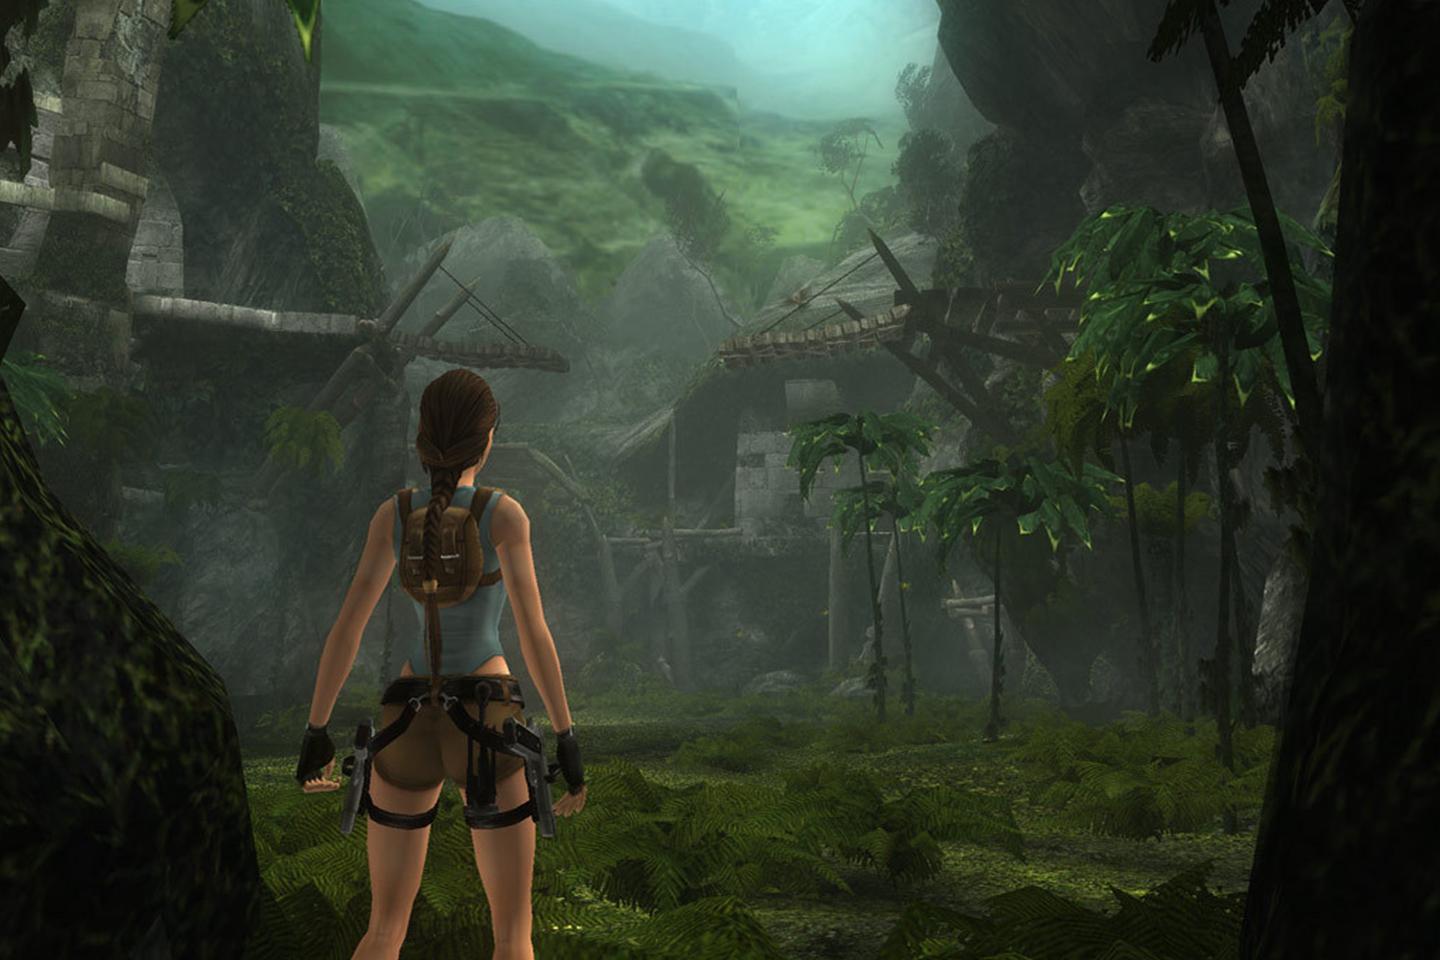 Lara looking out over mossy ancient village.